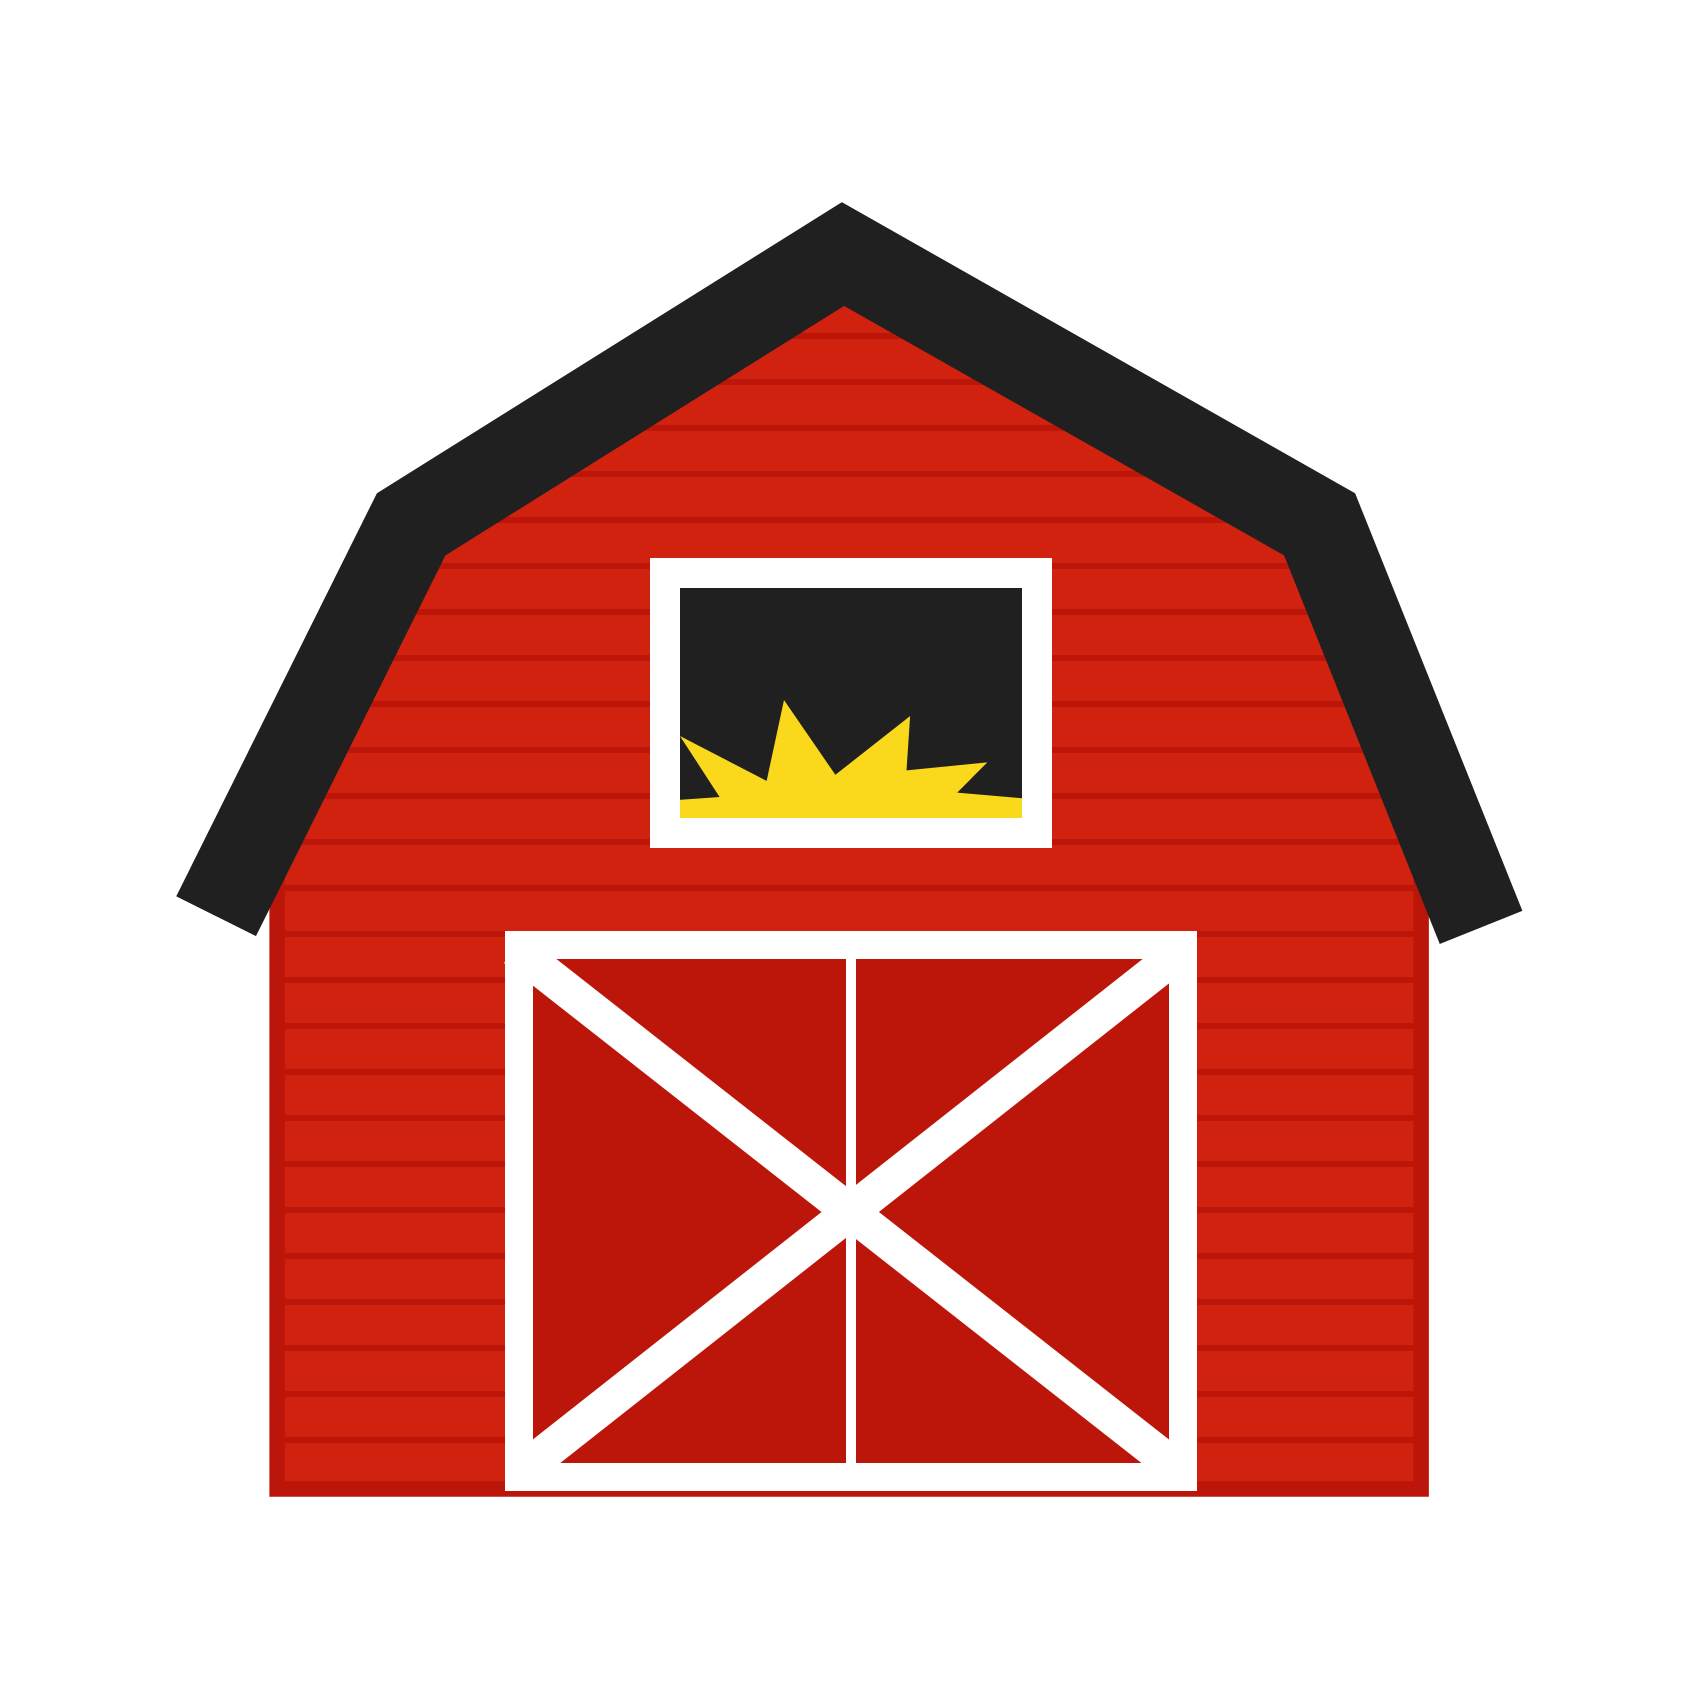 Red Barn Clipart   Clipart Best